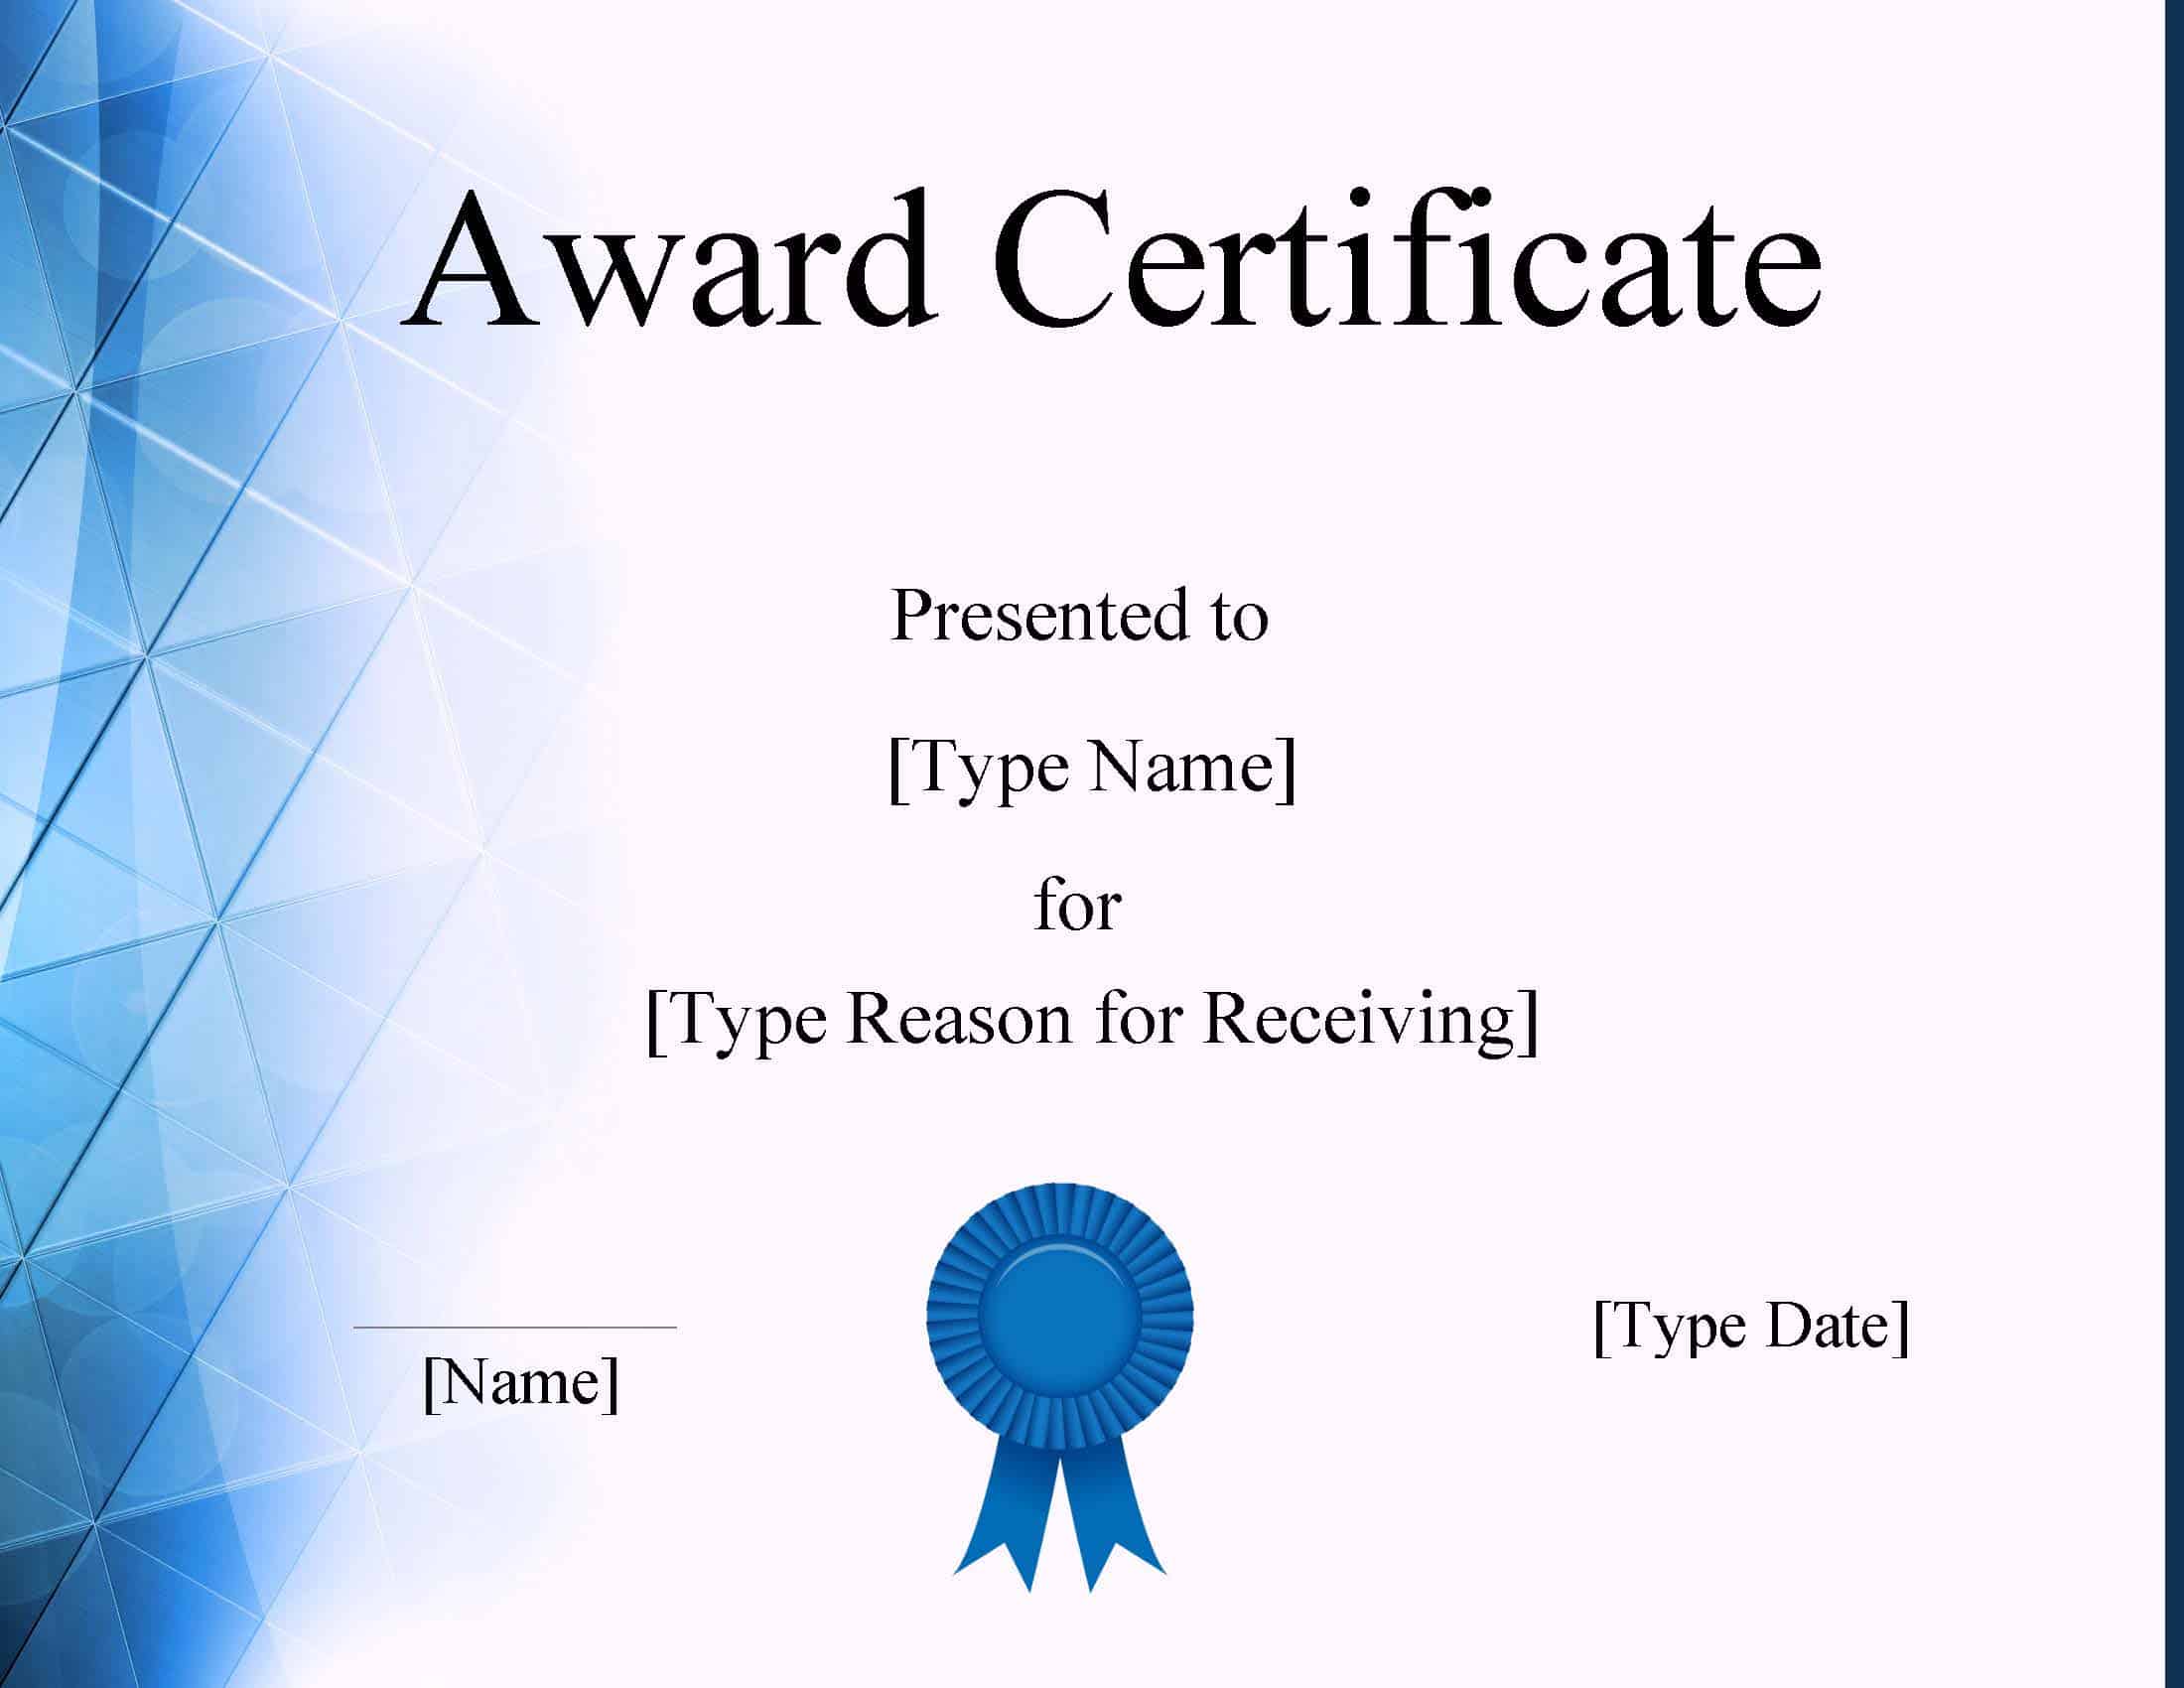 FREE Certificate Template Powerpoint  Instant Download Regarding Award Certificate Template Powerpoint